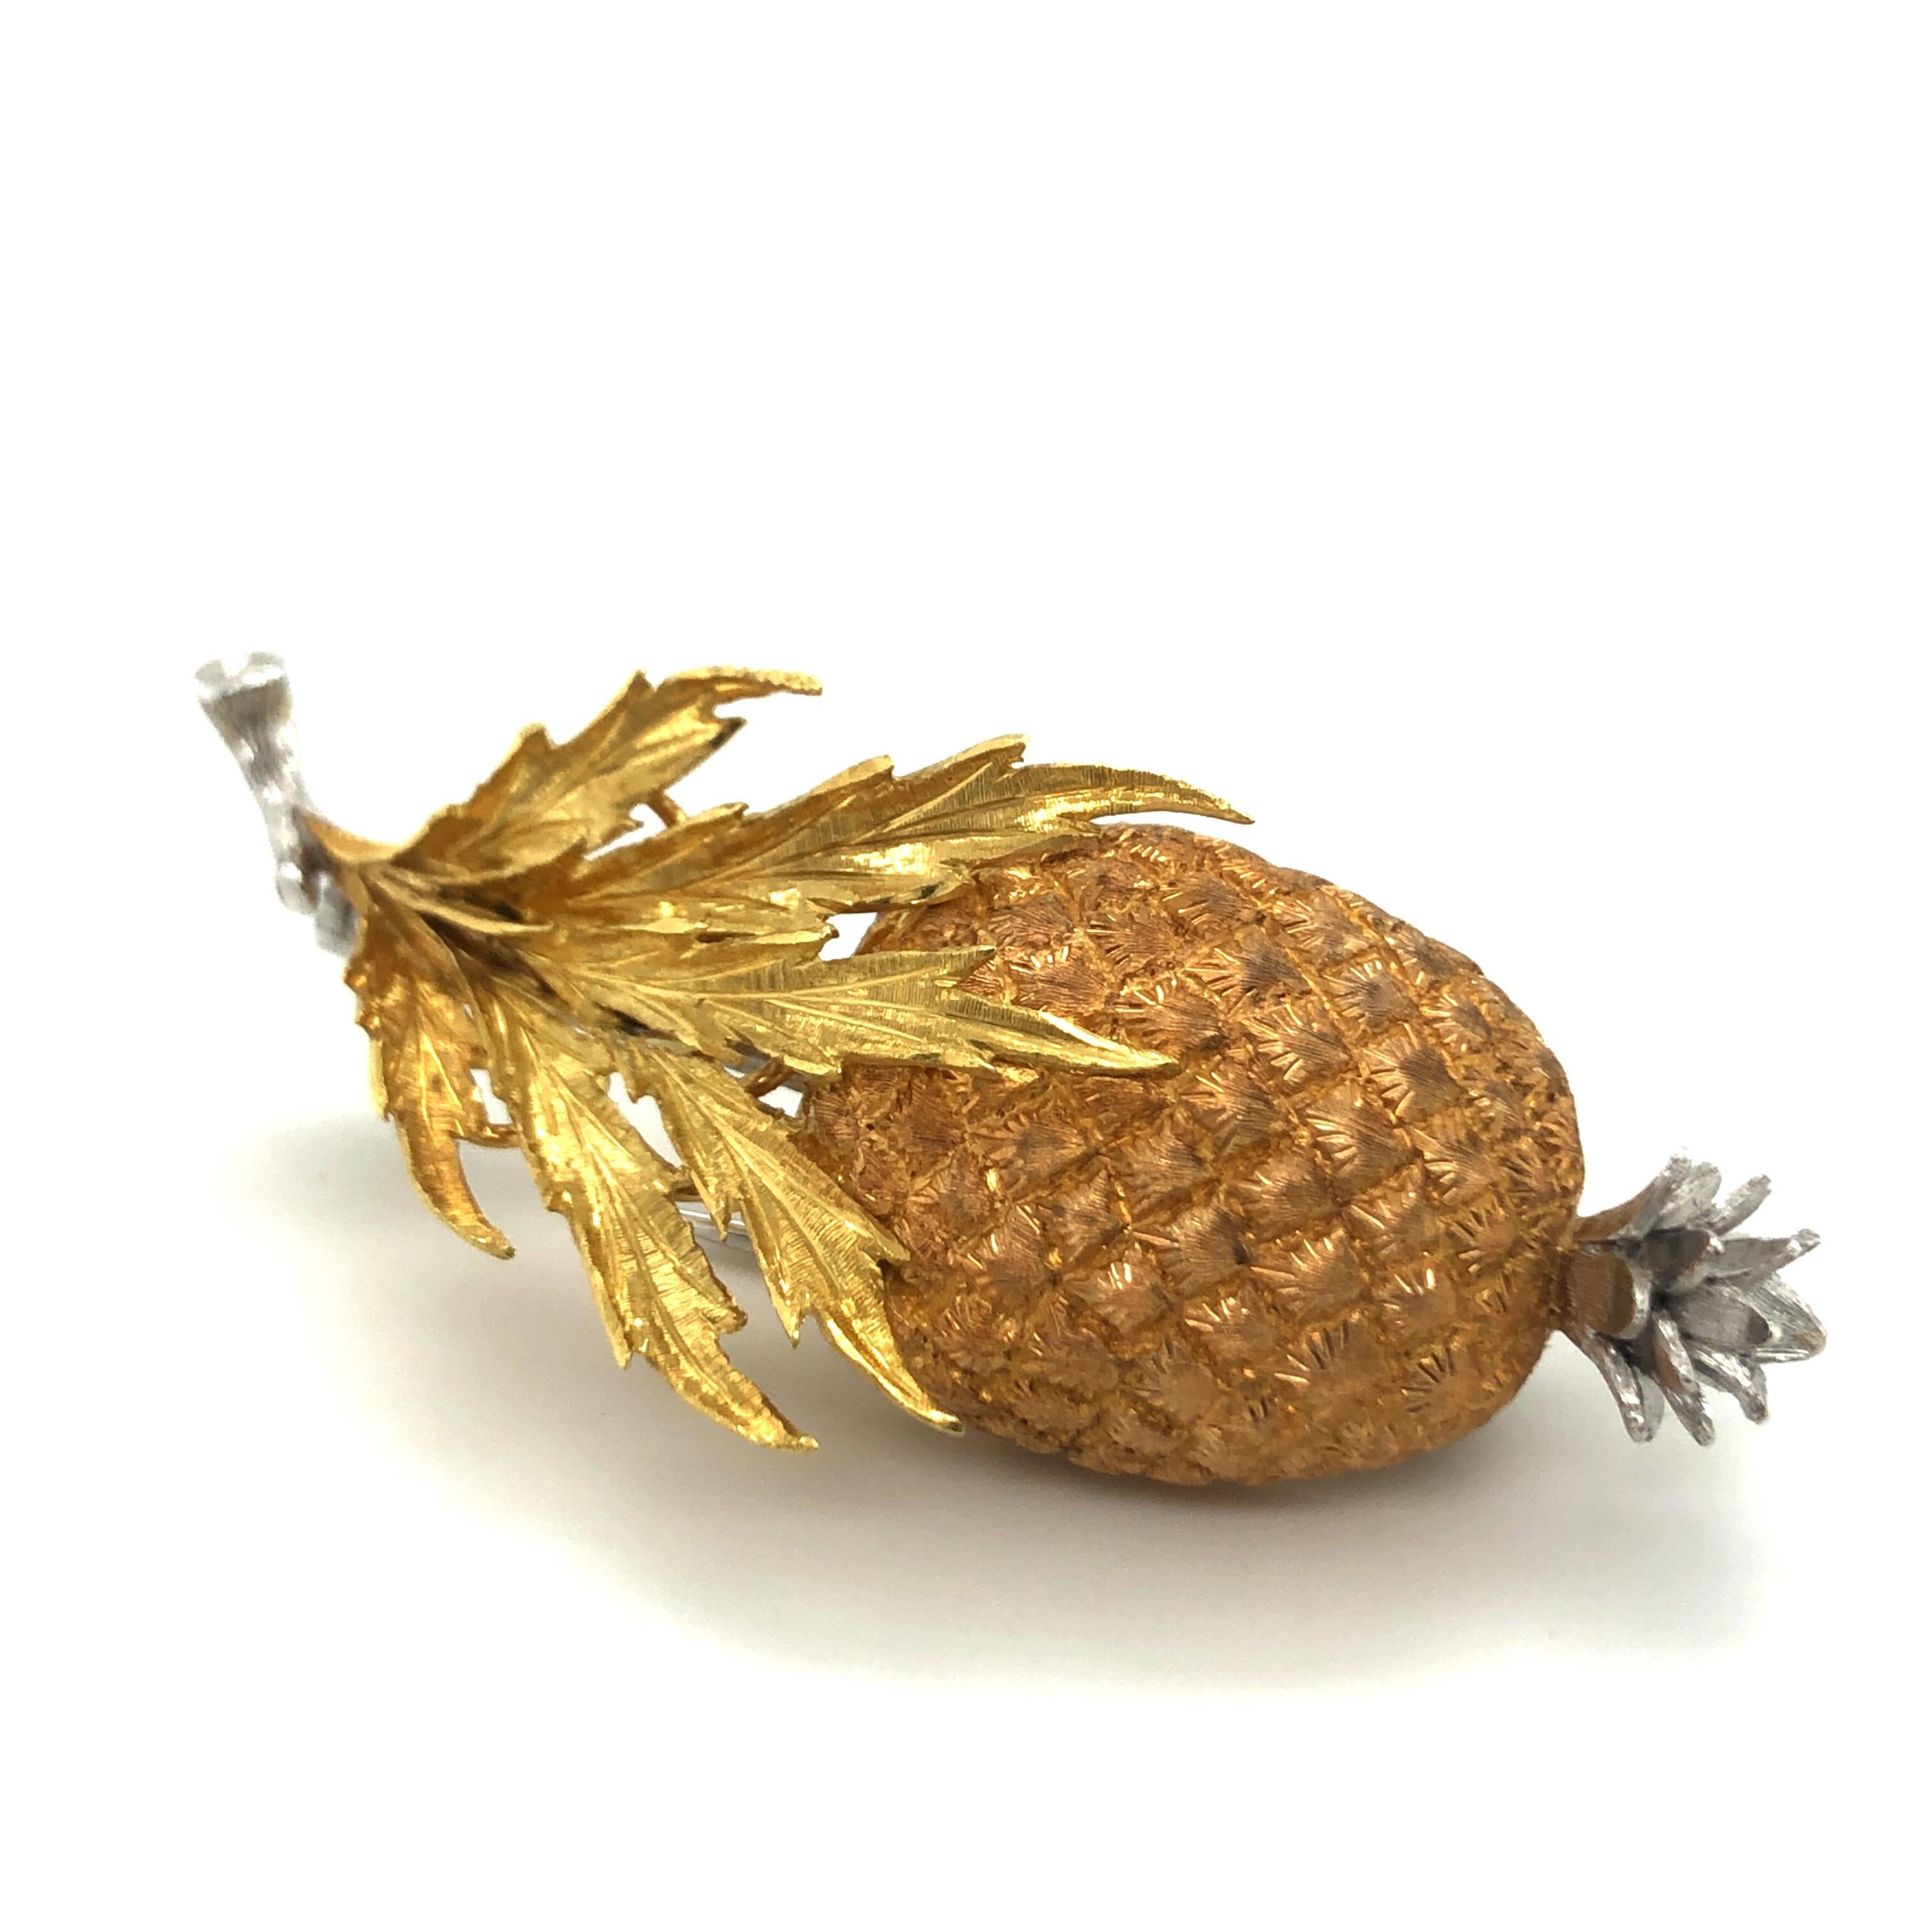 Summery Buccellati 18 karat white, yellow and rose gold pineapple brooch pin.
Decorative, original clip brooch depicting a richly detailed pineapple crafted in three different shades of gold. The brooch fastens with a double pin. It is light and